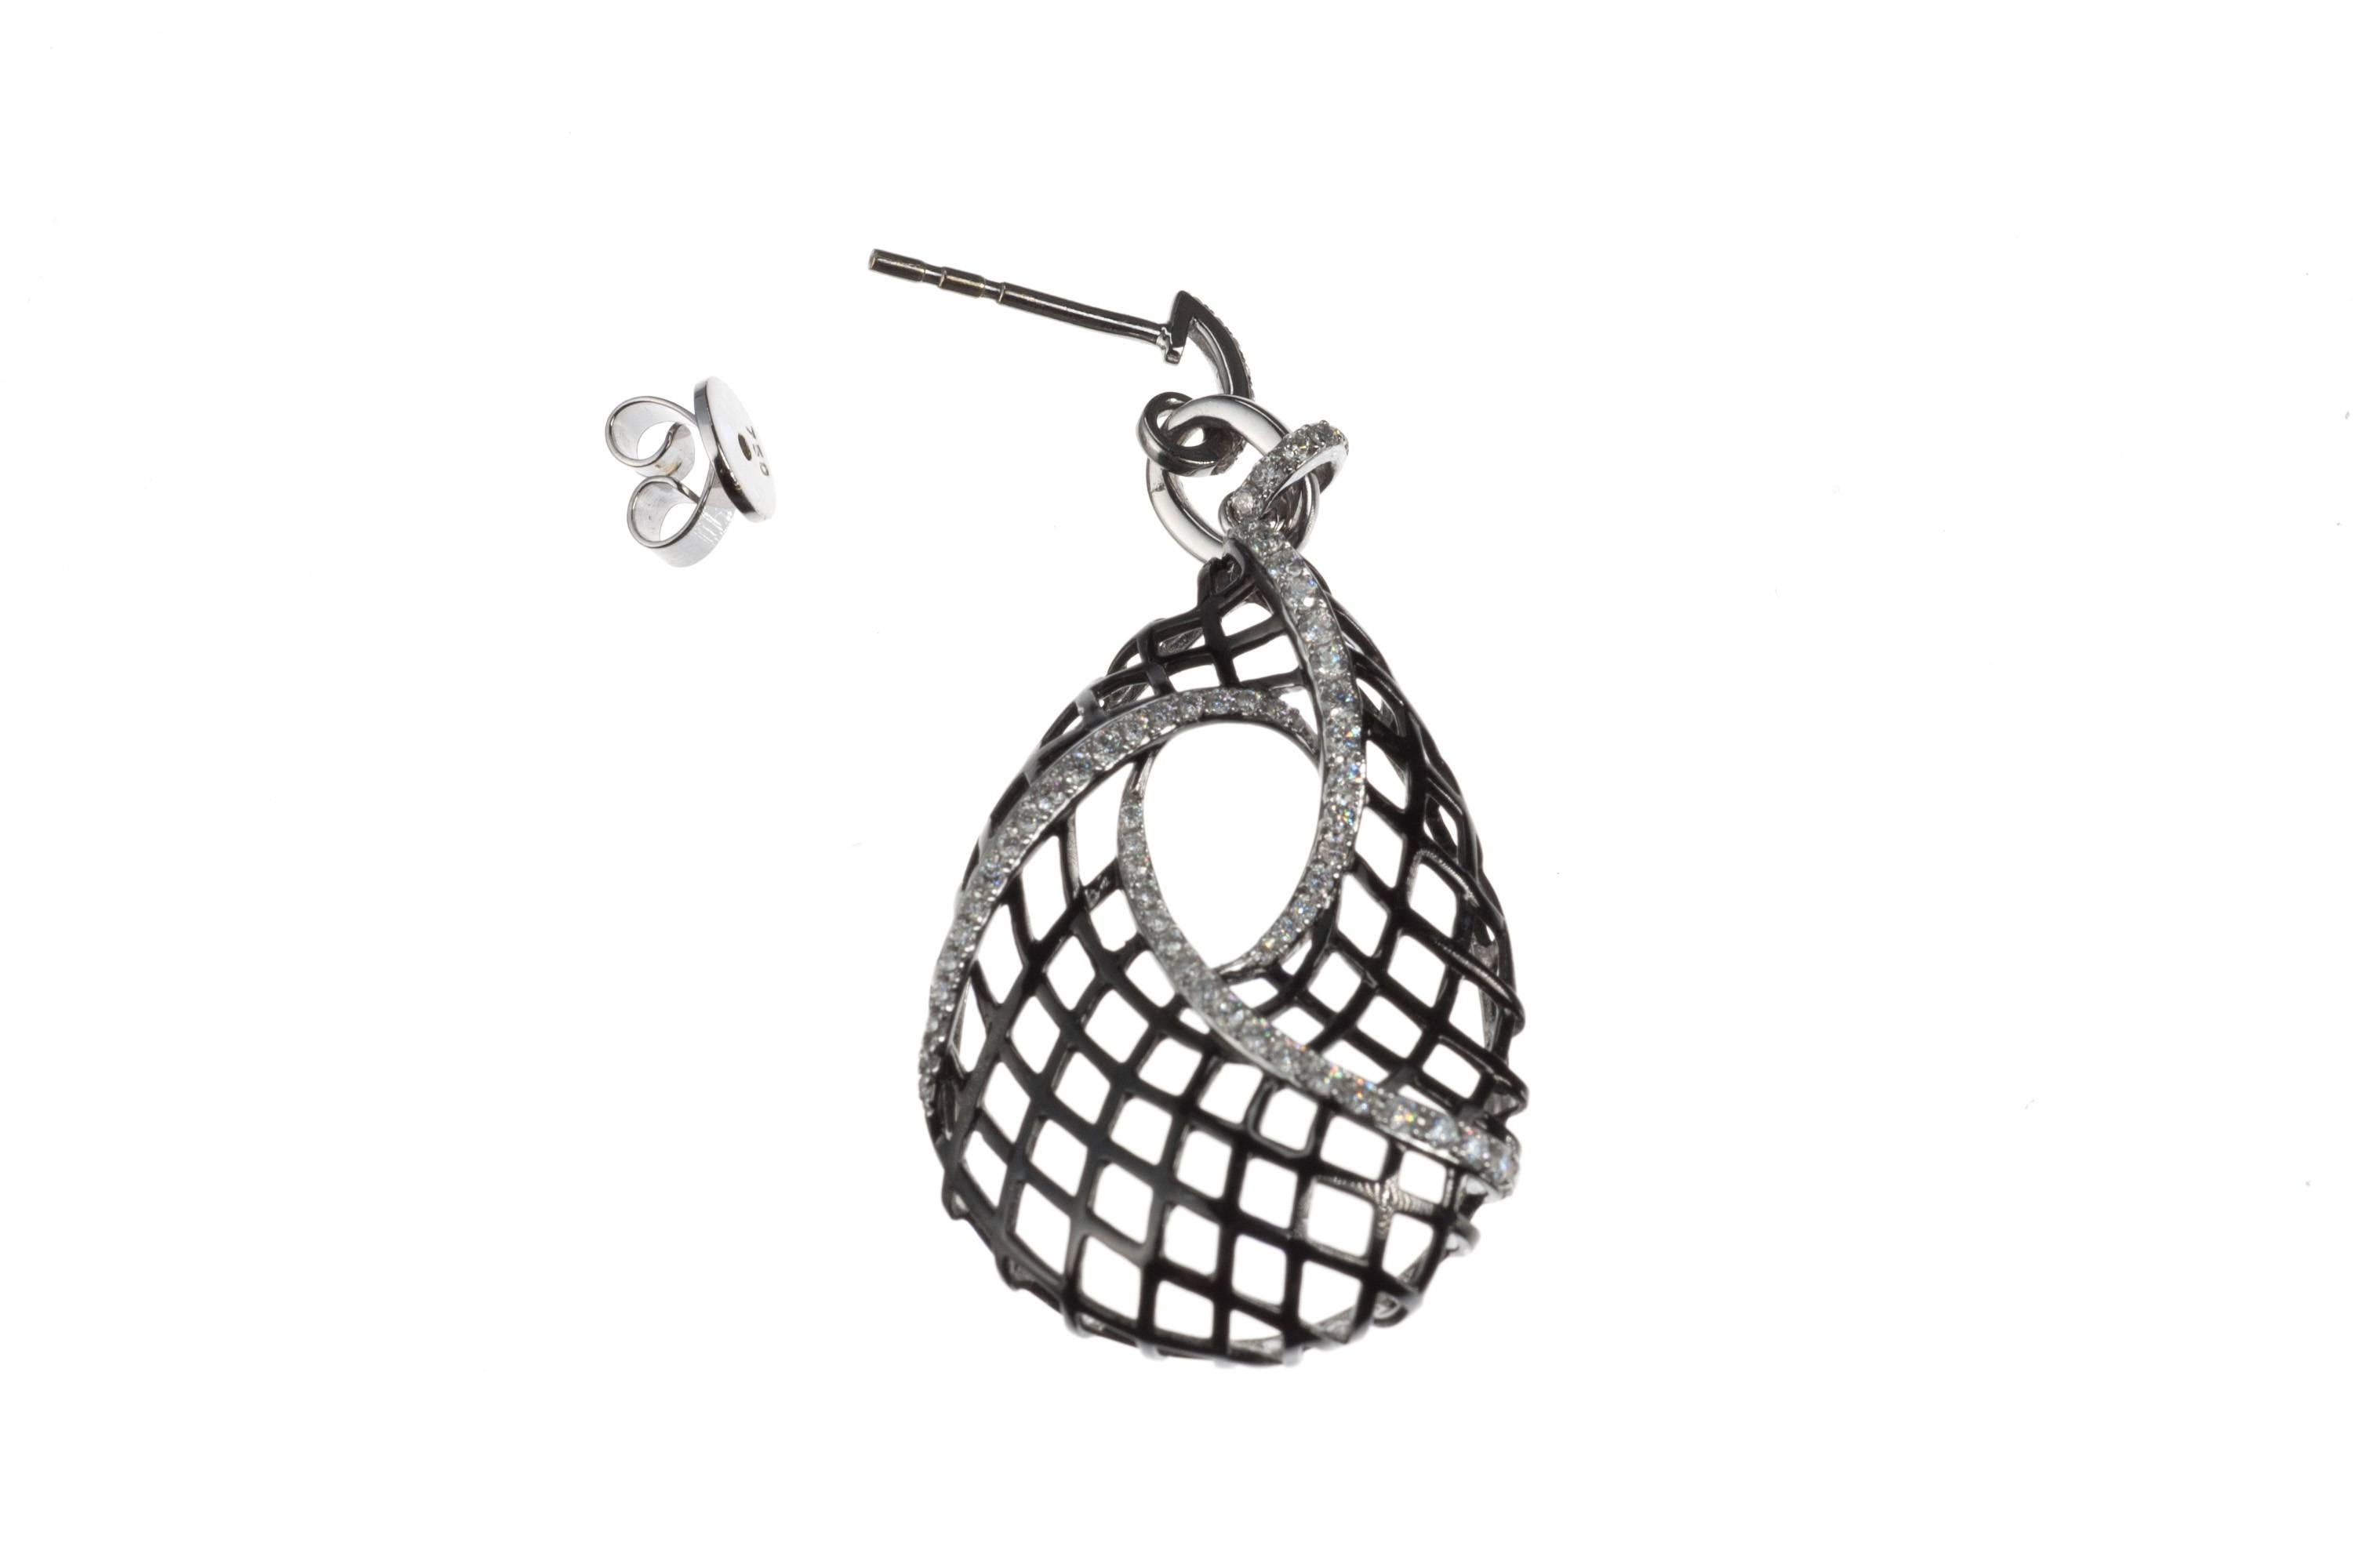 A dramatic pair of pear-shaped drop earrings appears to be woven from black rhodium-plated 18-karat white gold and is accented with ribbons of 154 brilliant-cut round diamonds, .80ctw. of G color and VS2 clarity. Secured with clutch backs on posts.  